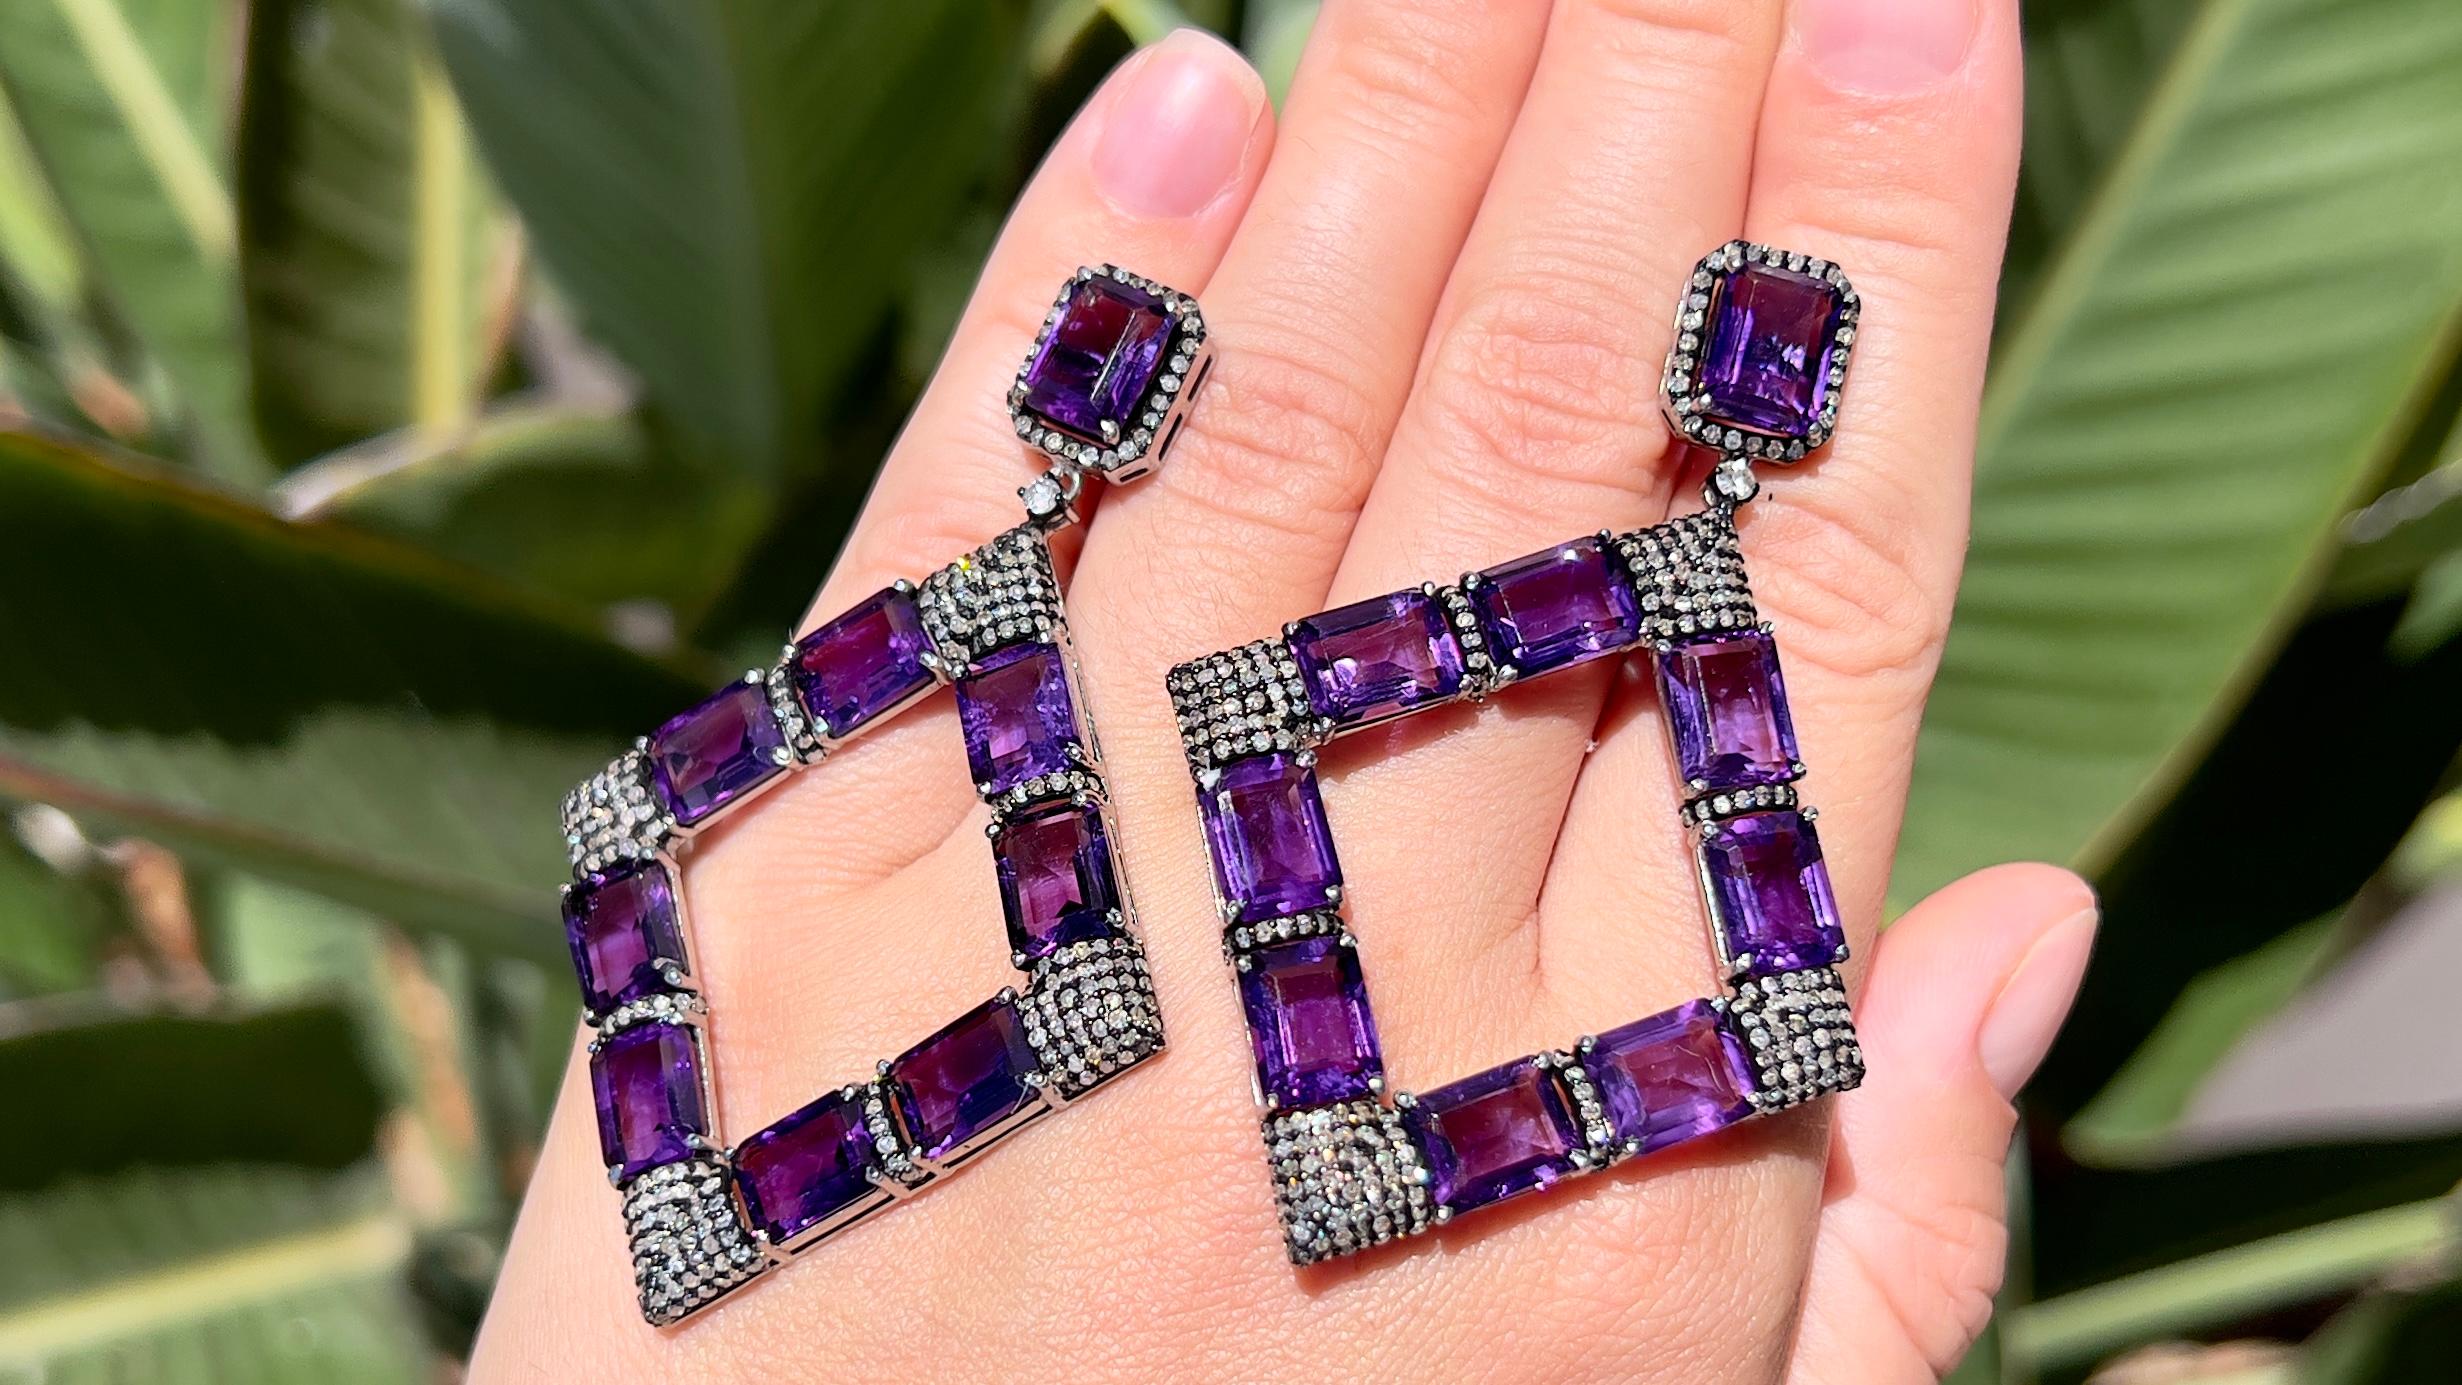 Very Fine Amethyst: 36 Carats
Diamonds: 3.60 Carats
18K Gold & Silver
Dimensions: 70 x 45 mm